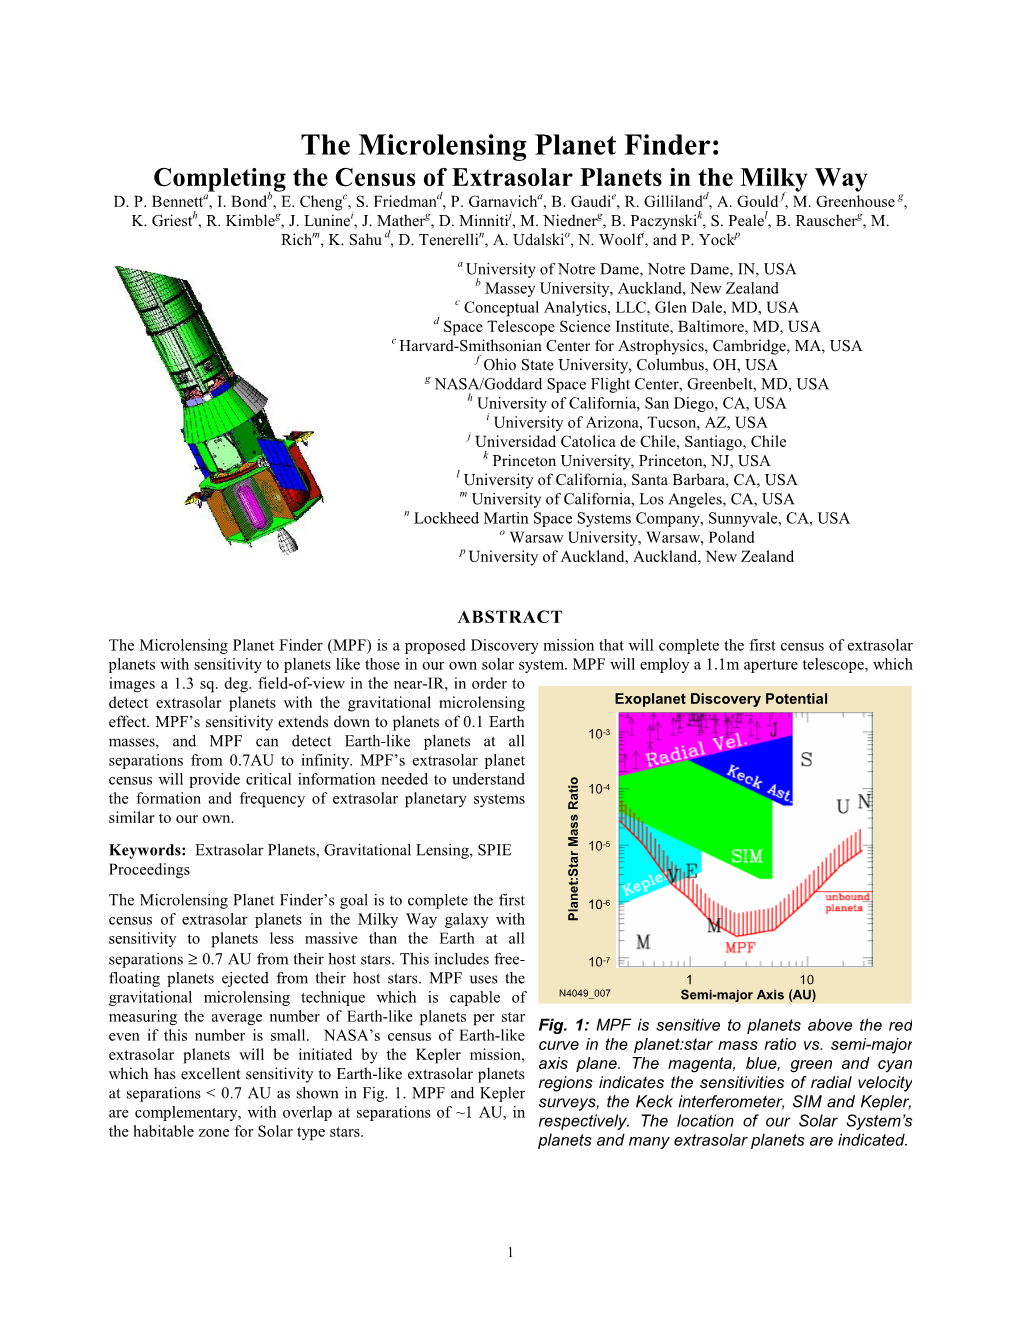 The Microlensing Planet Finder: Completing the Census of Extrasolar Planets in the Milky Way D